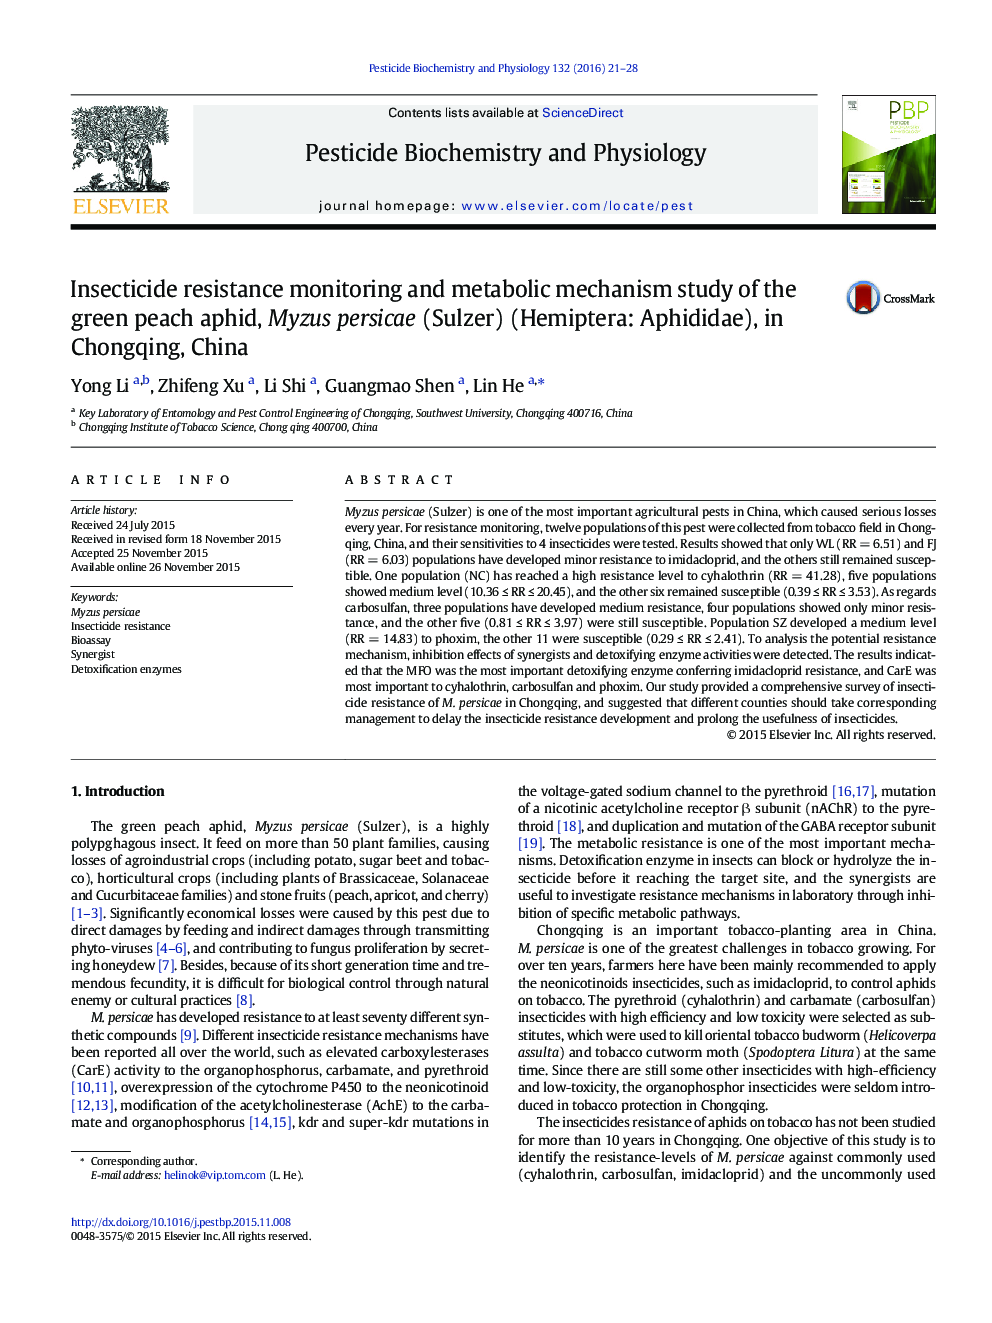 Insecticide resistance monitoring and metabolic mechanism study of the green peach aphid, Myzus persicae (Sulzer) (Hemiptera: Aphididae), in Chongqing, China